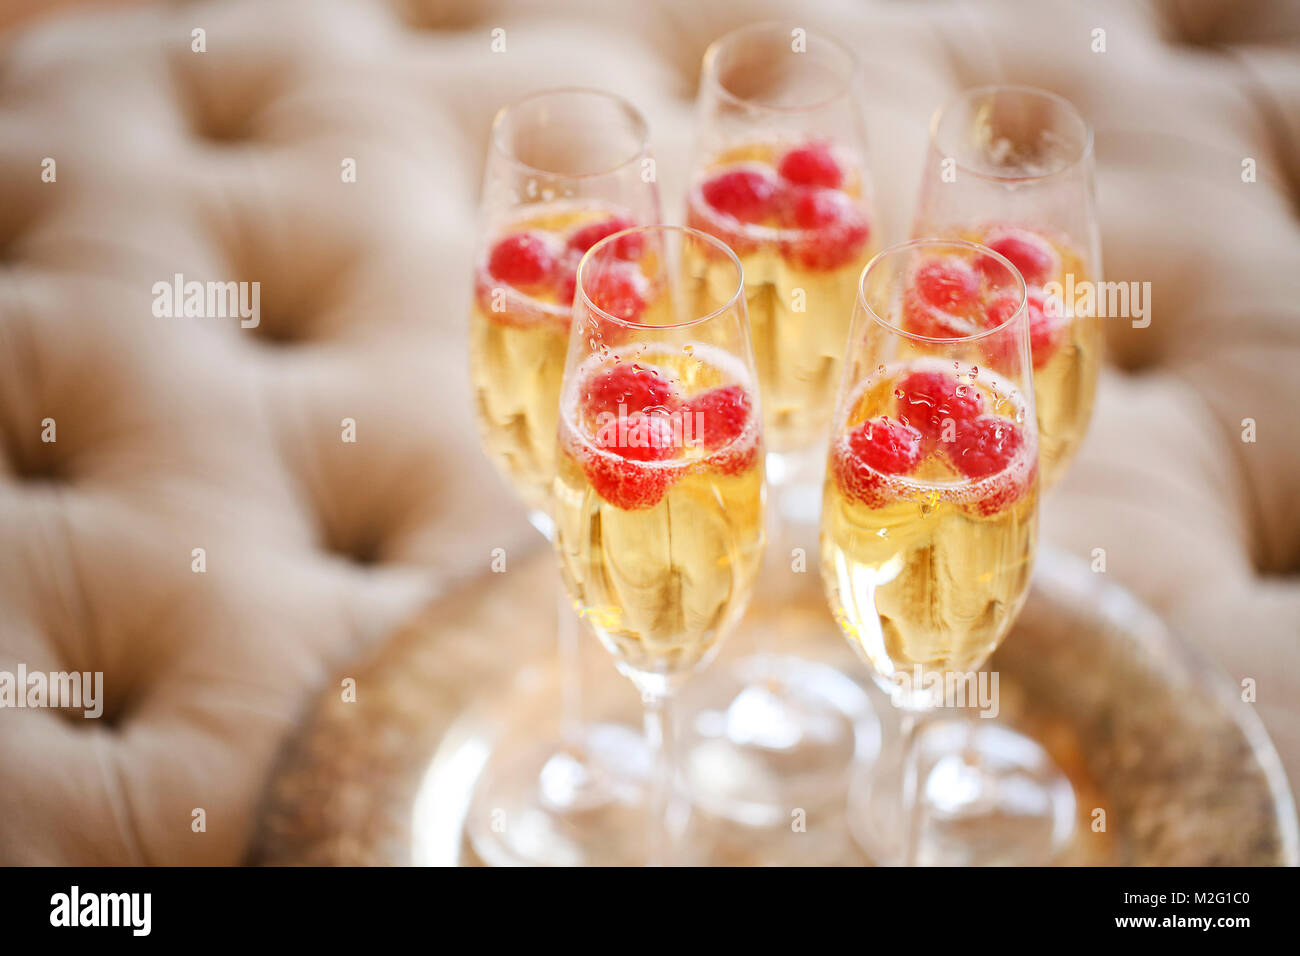 https://c8.alamy.com/comp/M2G1C0/champagne-glasses-on-silver-tray-party-and-holiday-celebration-concept-M2G1C0.jpg